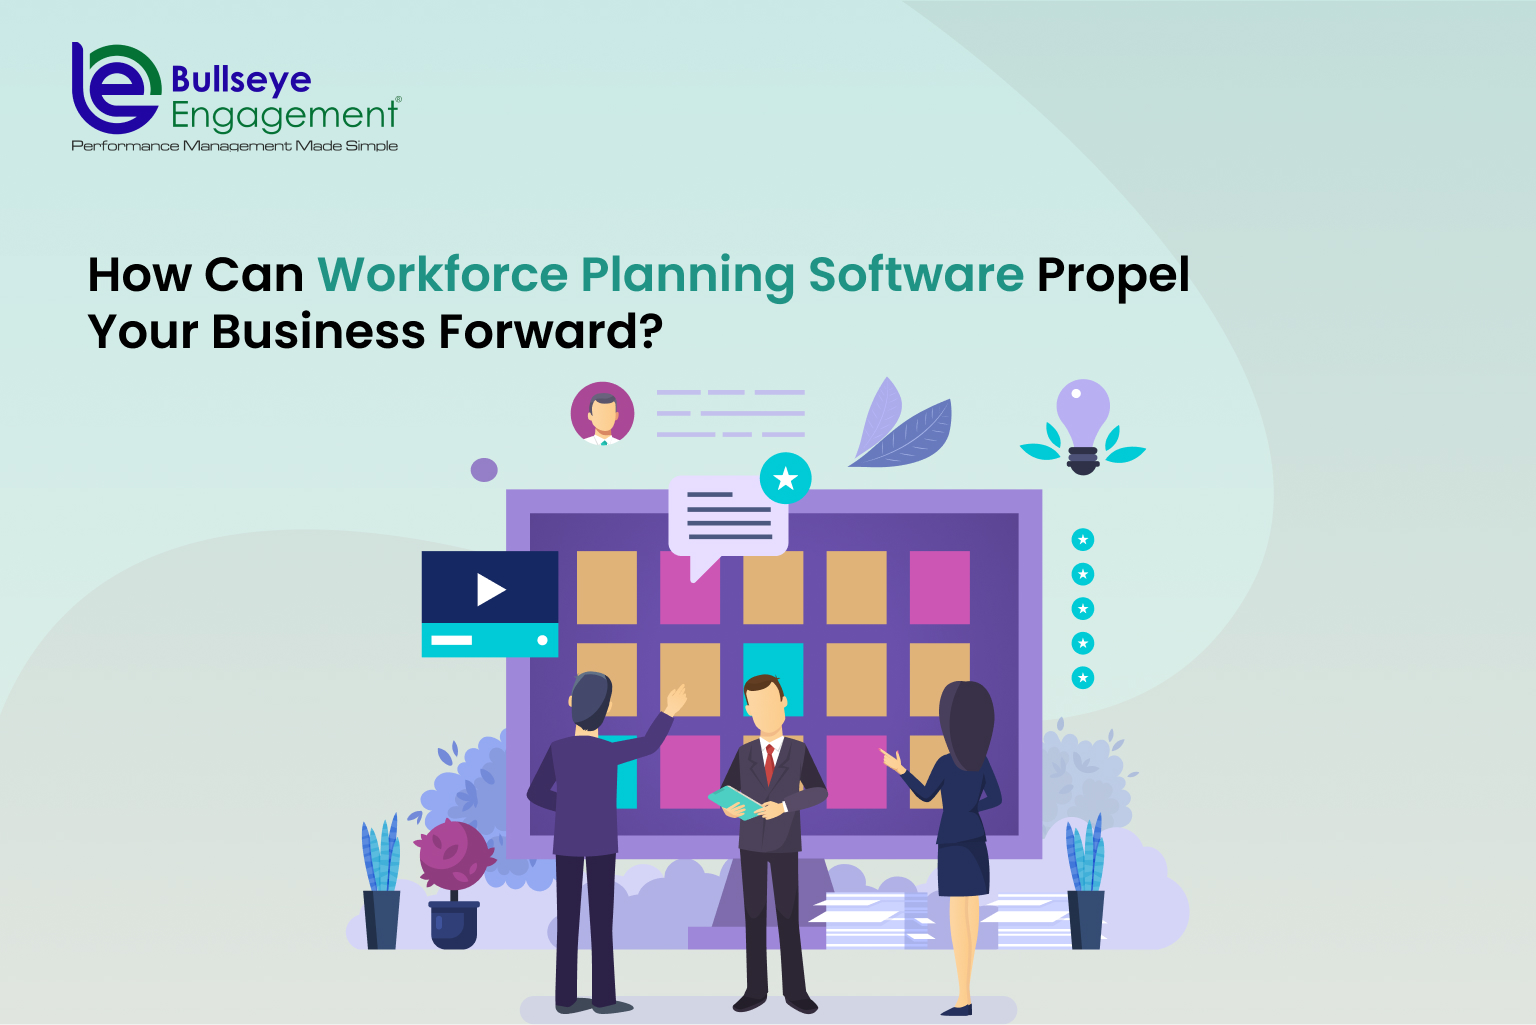 How Can Workforce Planning Software Propel Your Business Forward